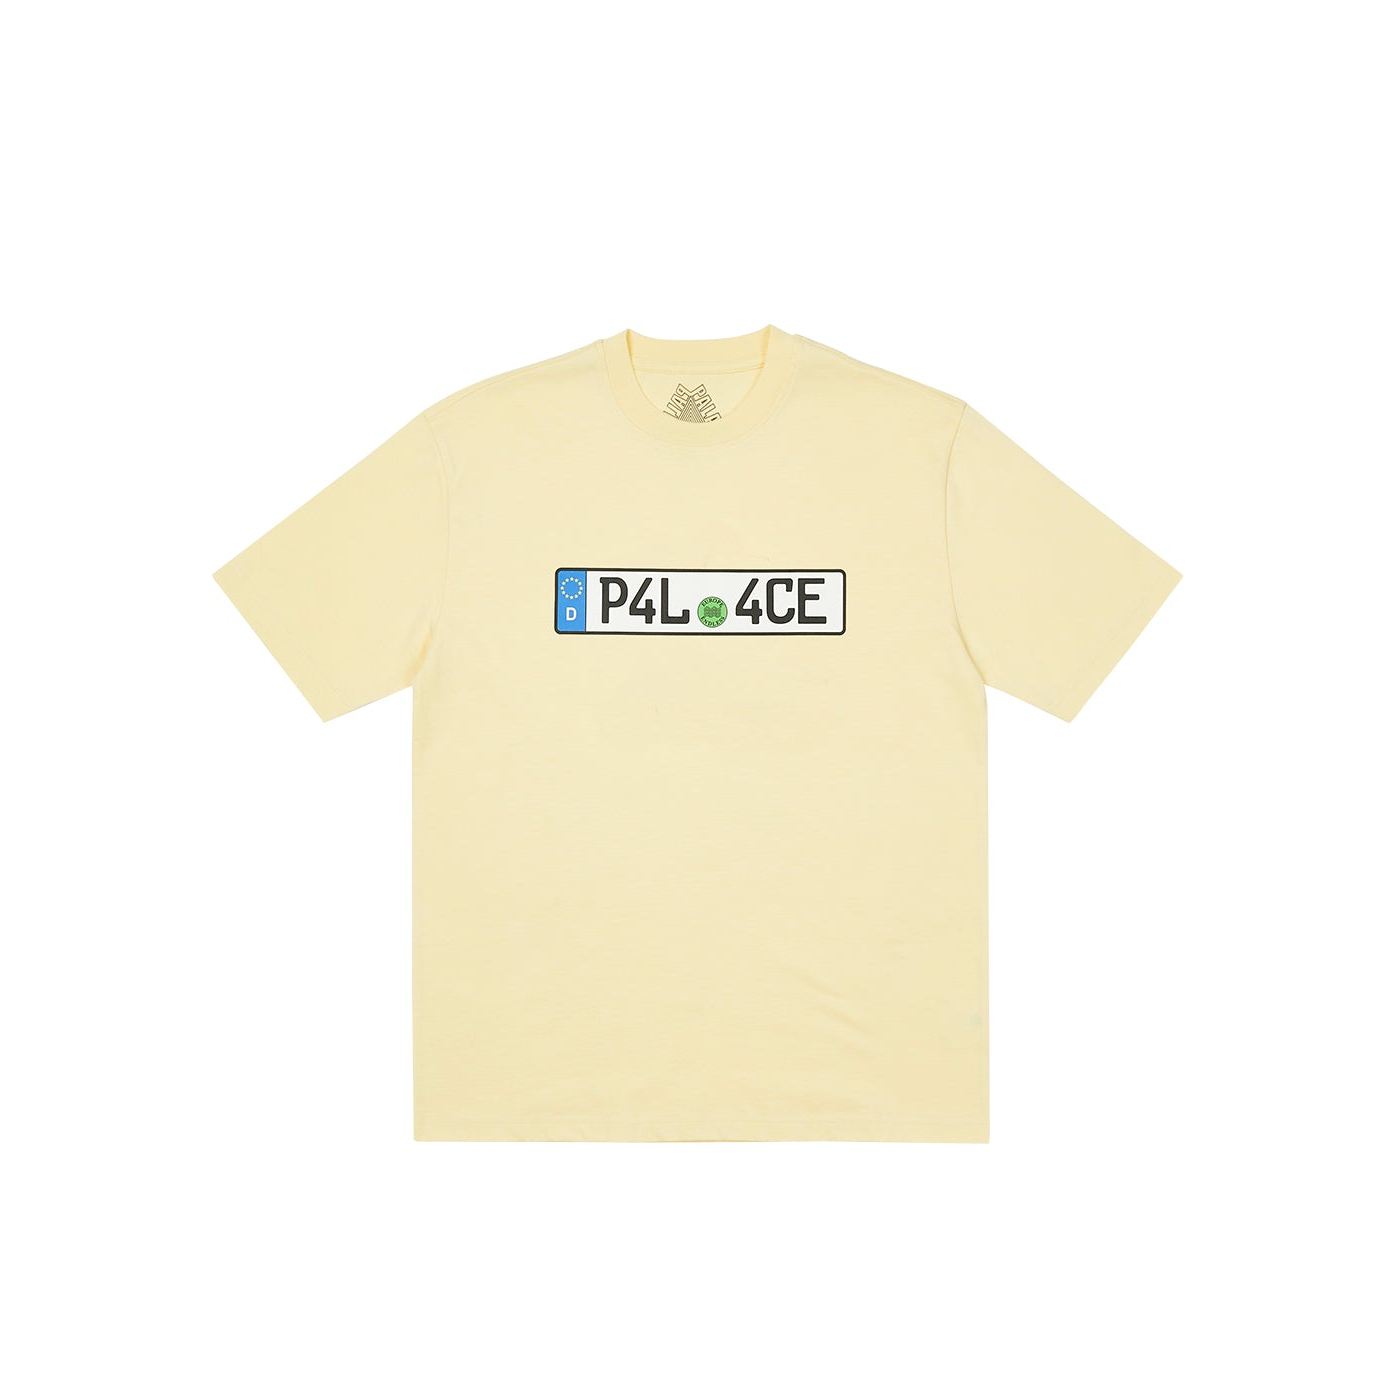 Thumbnail PLATE T-SHIRT MELLOW YELLOW one color